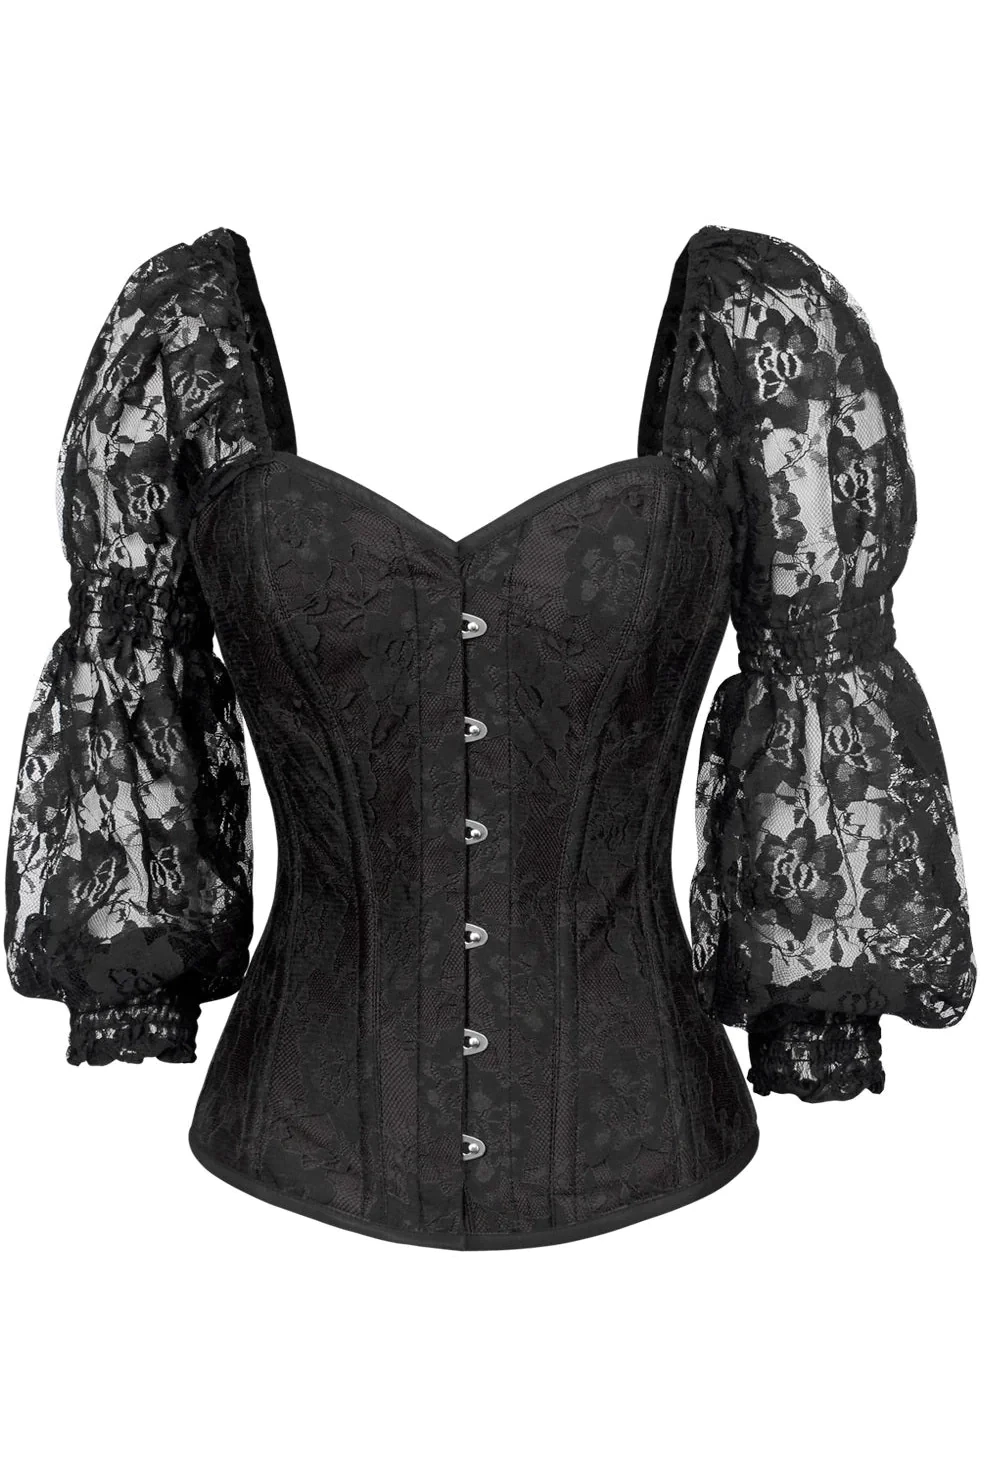 Black Lace over Purple Satin Victorian Corset Long-sleeved Top